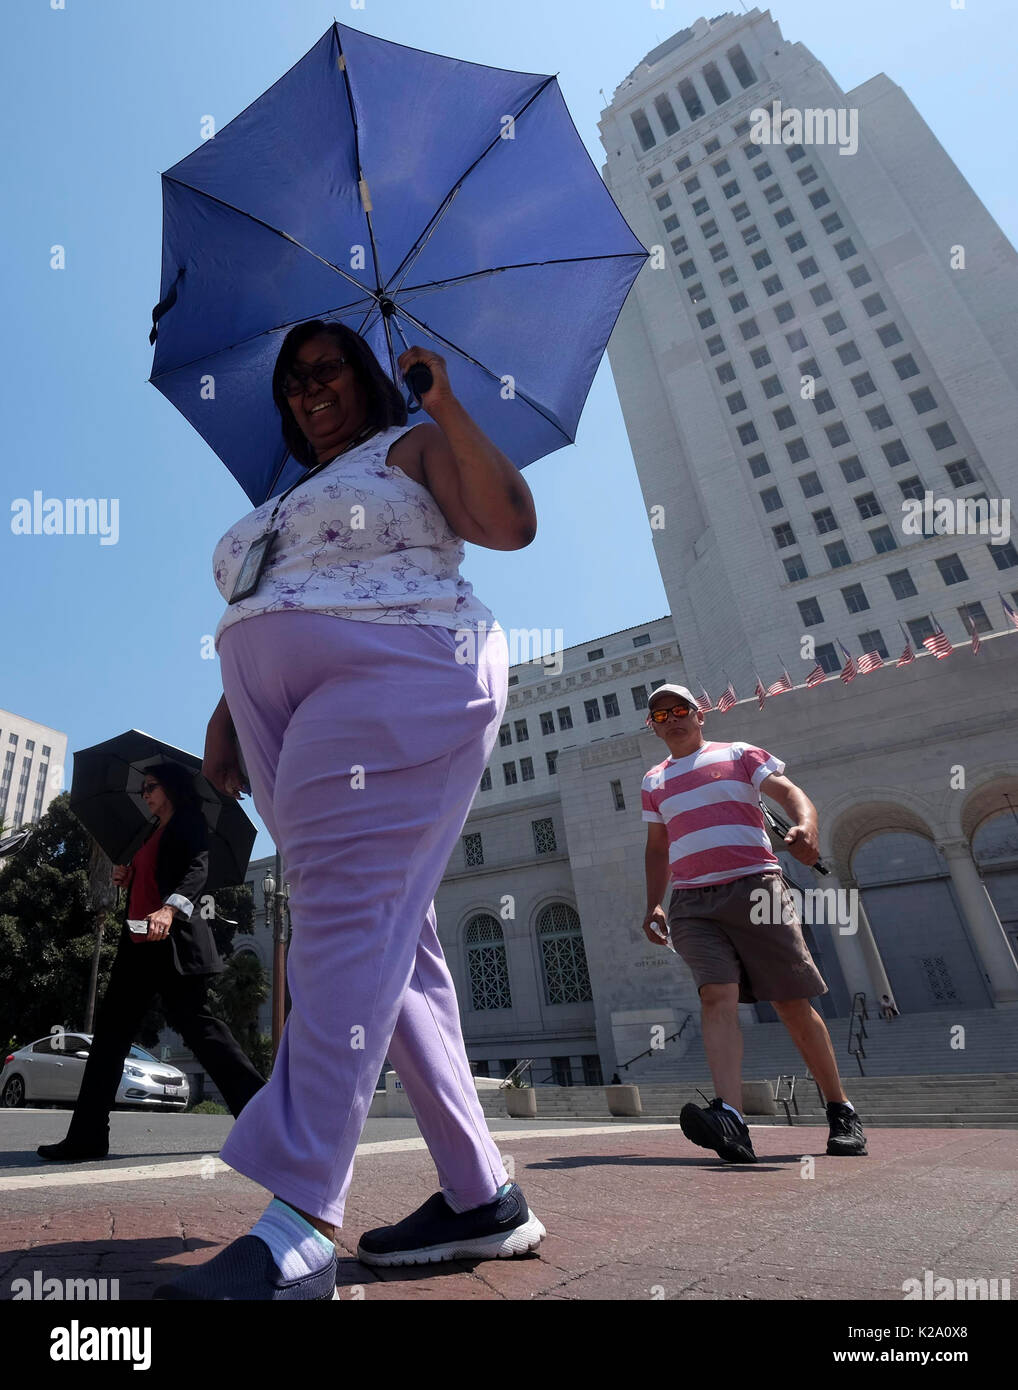 Los Angeles, USA. 29th Aug, 2017. A woman holds an umbrella to shield herself from the sun as she waits for a bus on Aug. 29, 2017 in Los Angeles, the United States. A heat wave hit south California on Tuesday, raising the highest temperature to more than 37 degrees Celsius in many areas. Credit: Zhao Hanrong/Xinhua/Alamy Live News Stock Photo